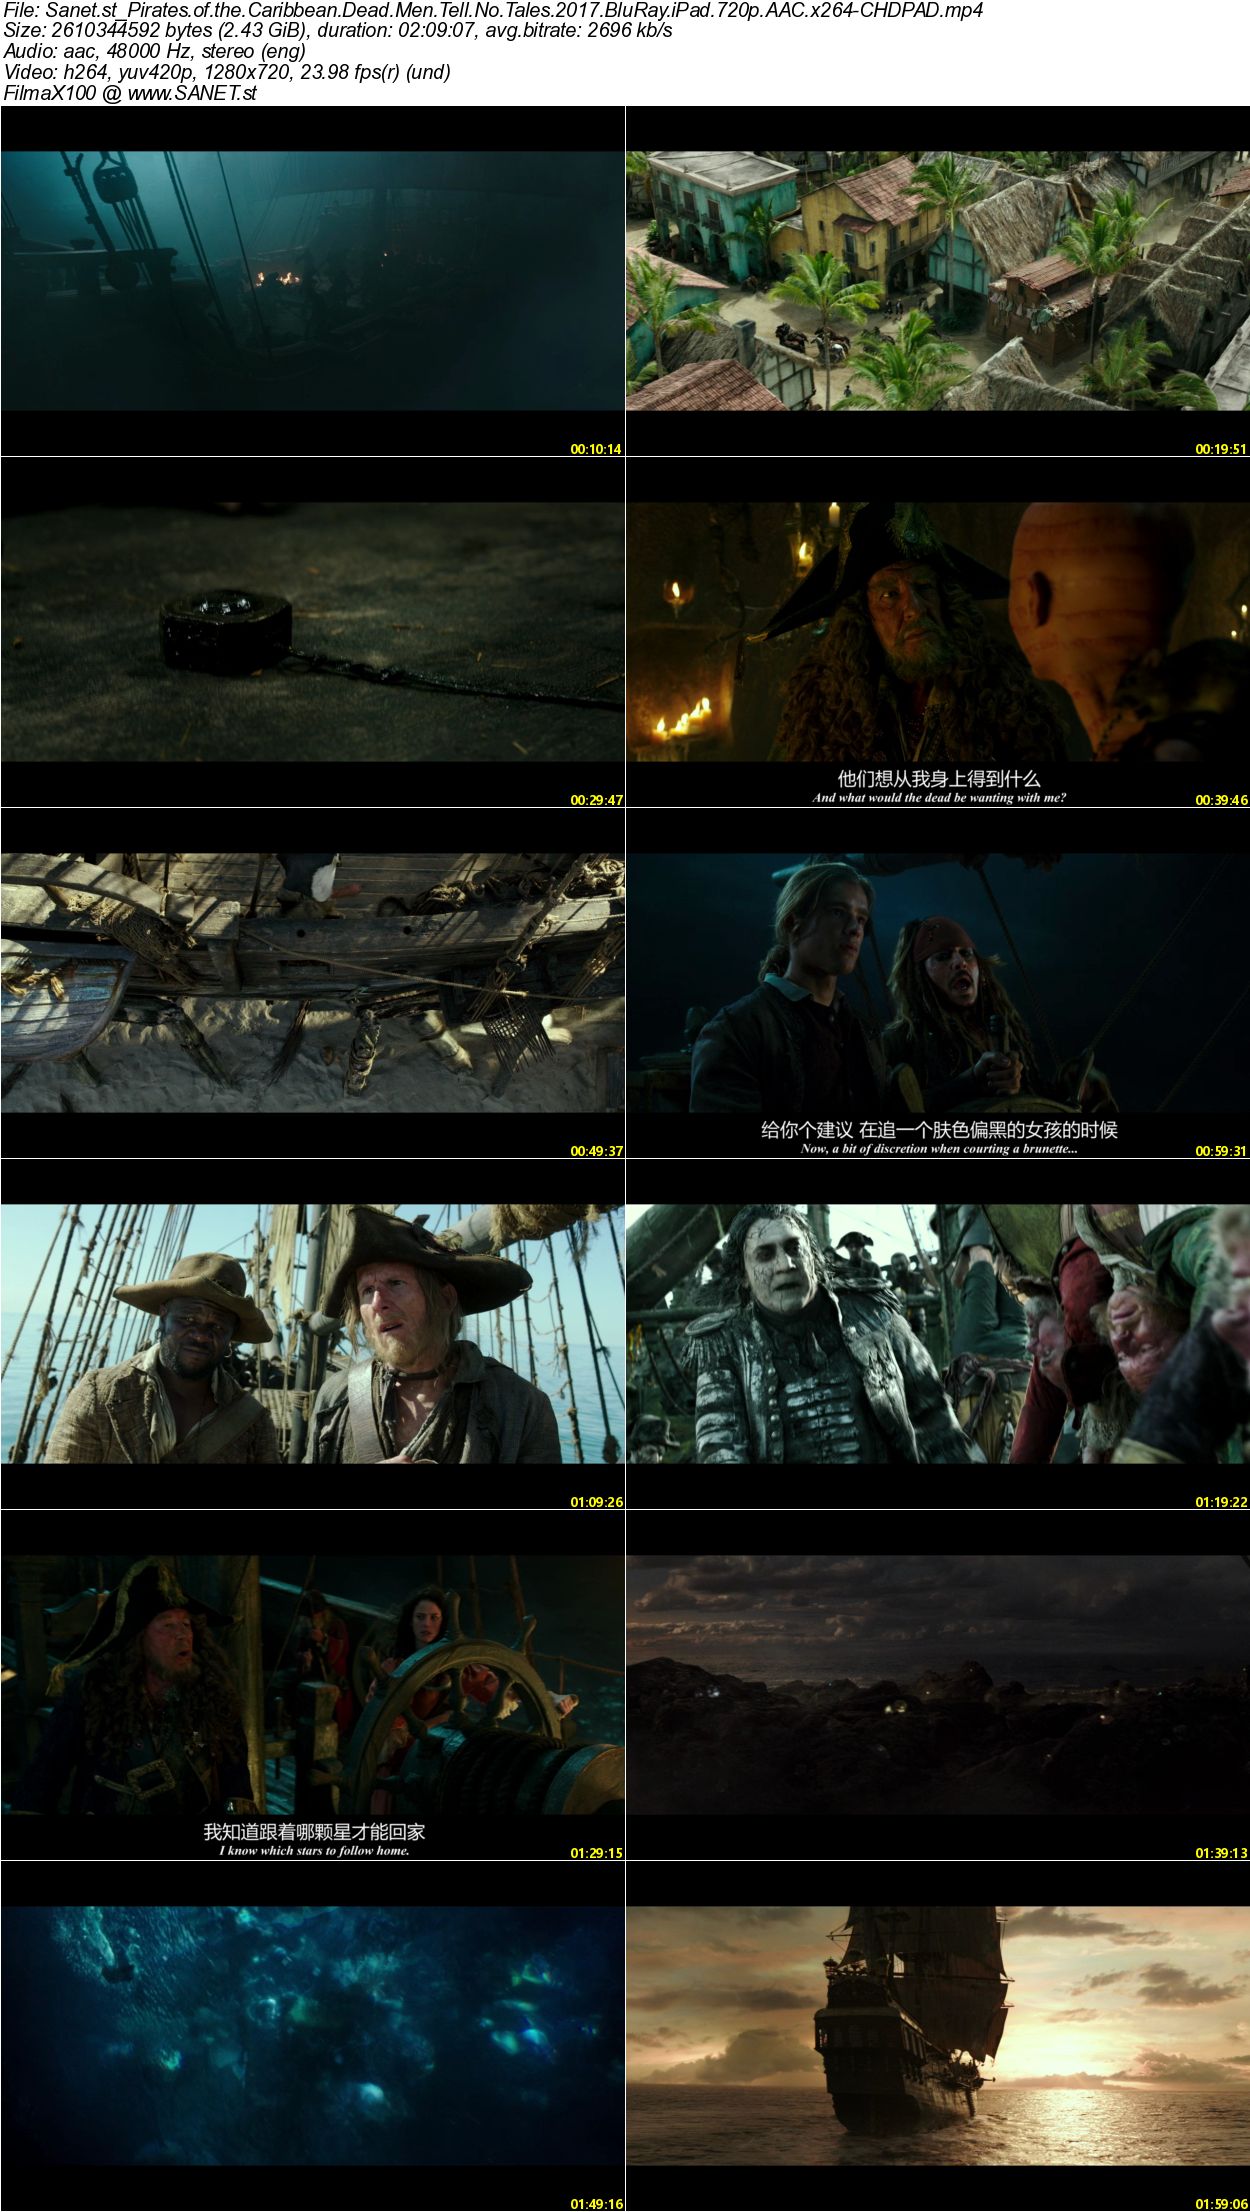 instal the new for ios Pirates of the Caribbean: Dead Man’s